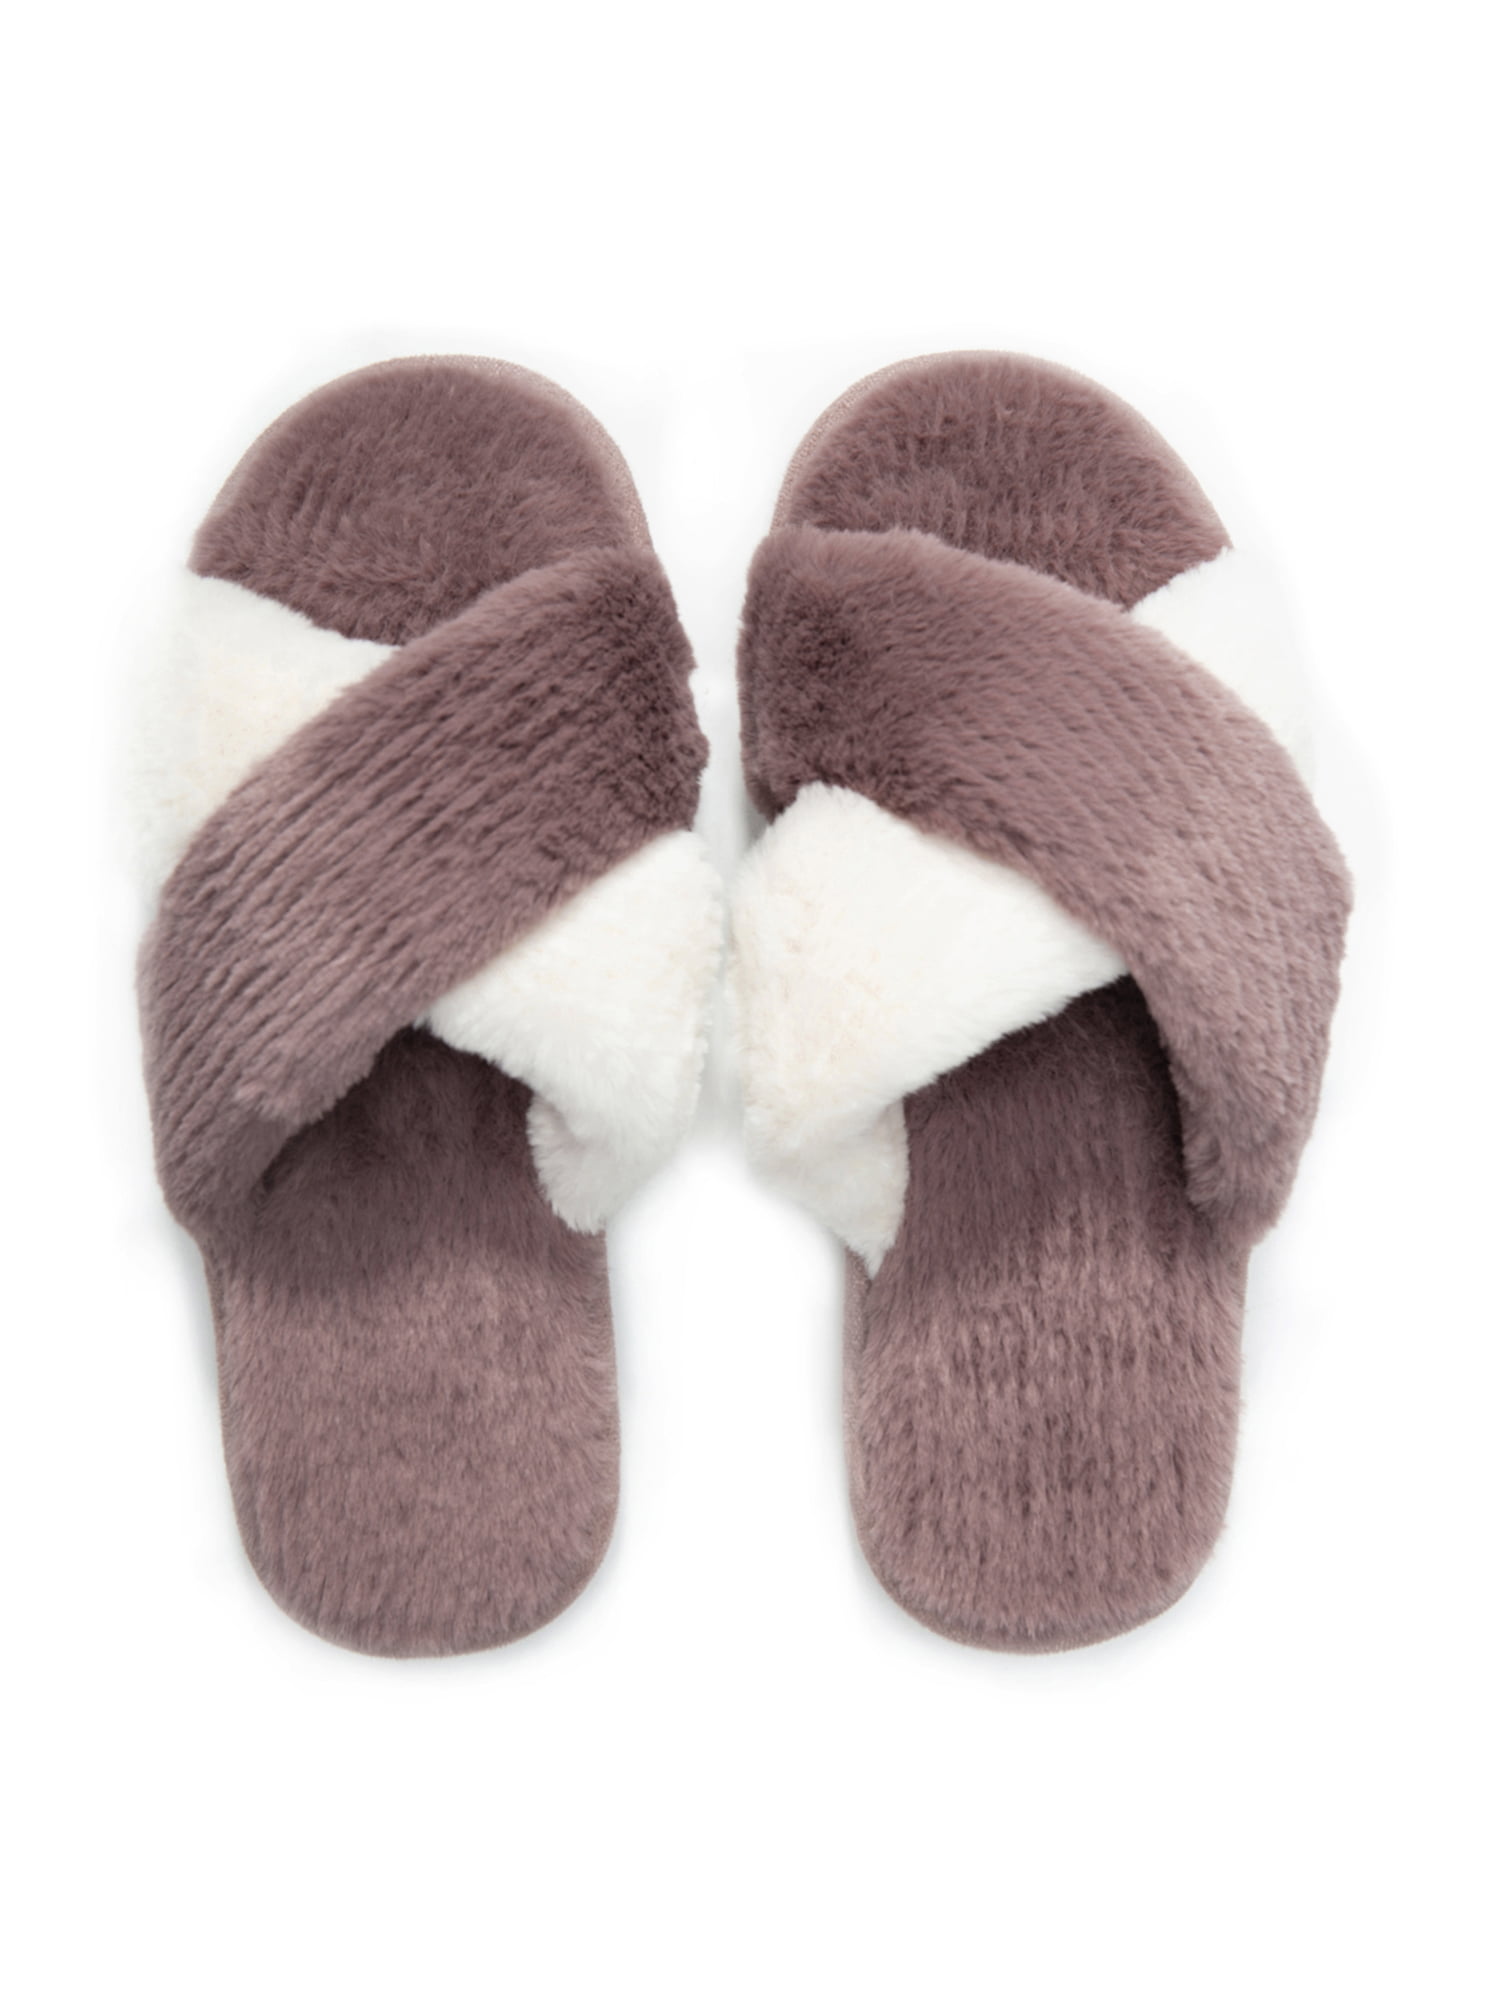 FITORY Womens Open Toe Fuzzy Slippers Faux Fur Fluffy House Slides with Cork Footbed Size 4-9